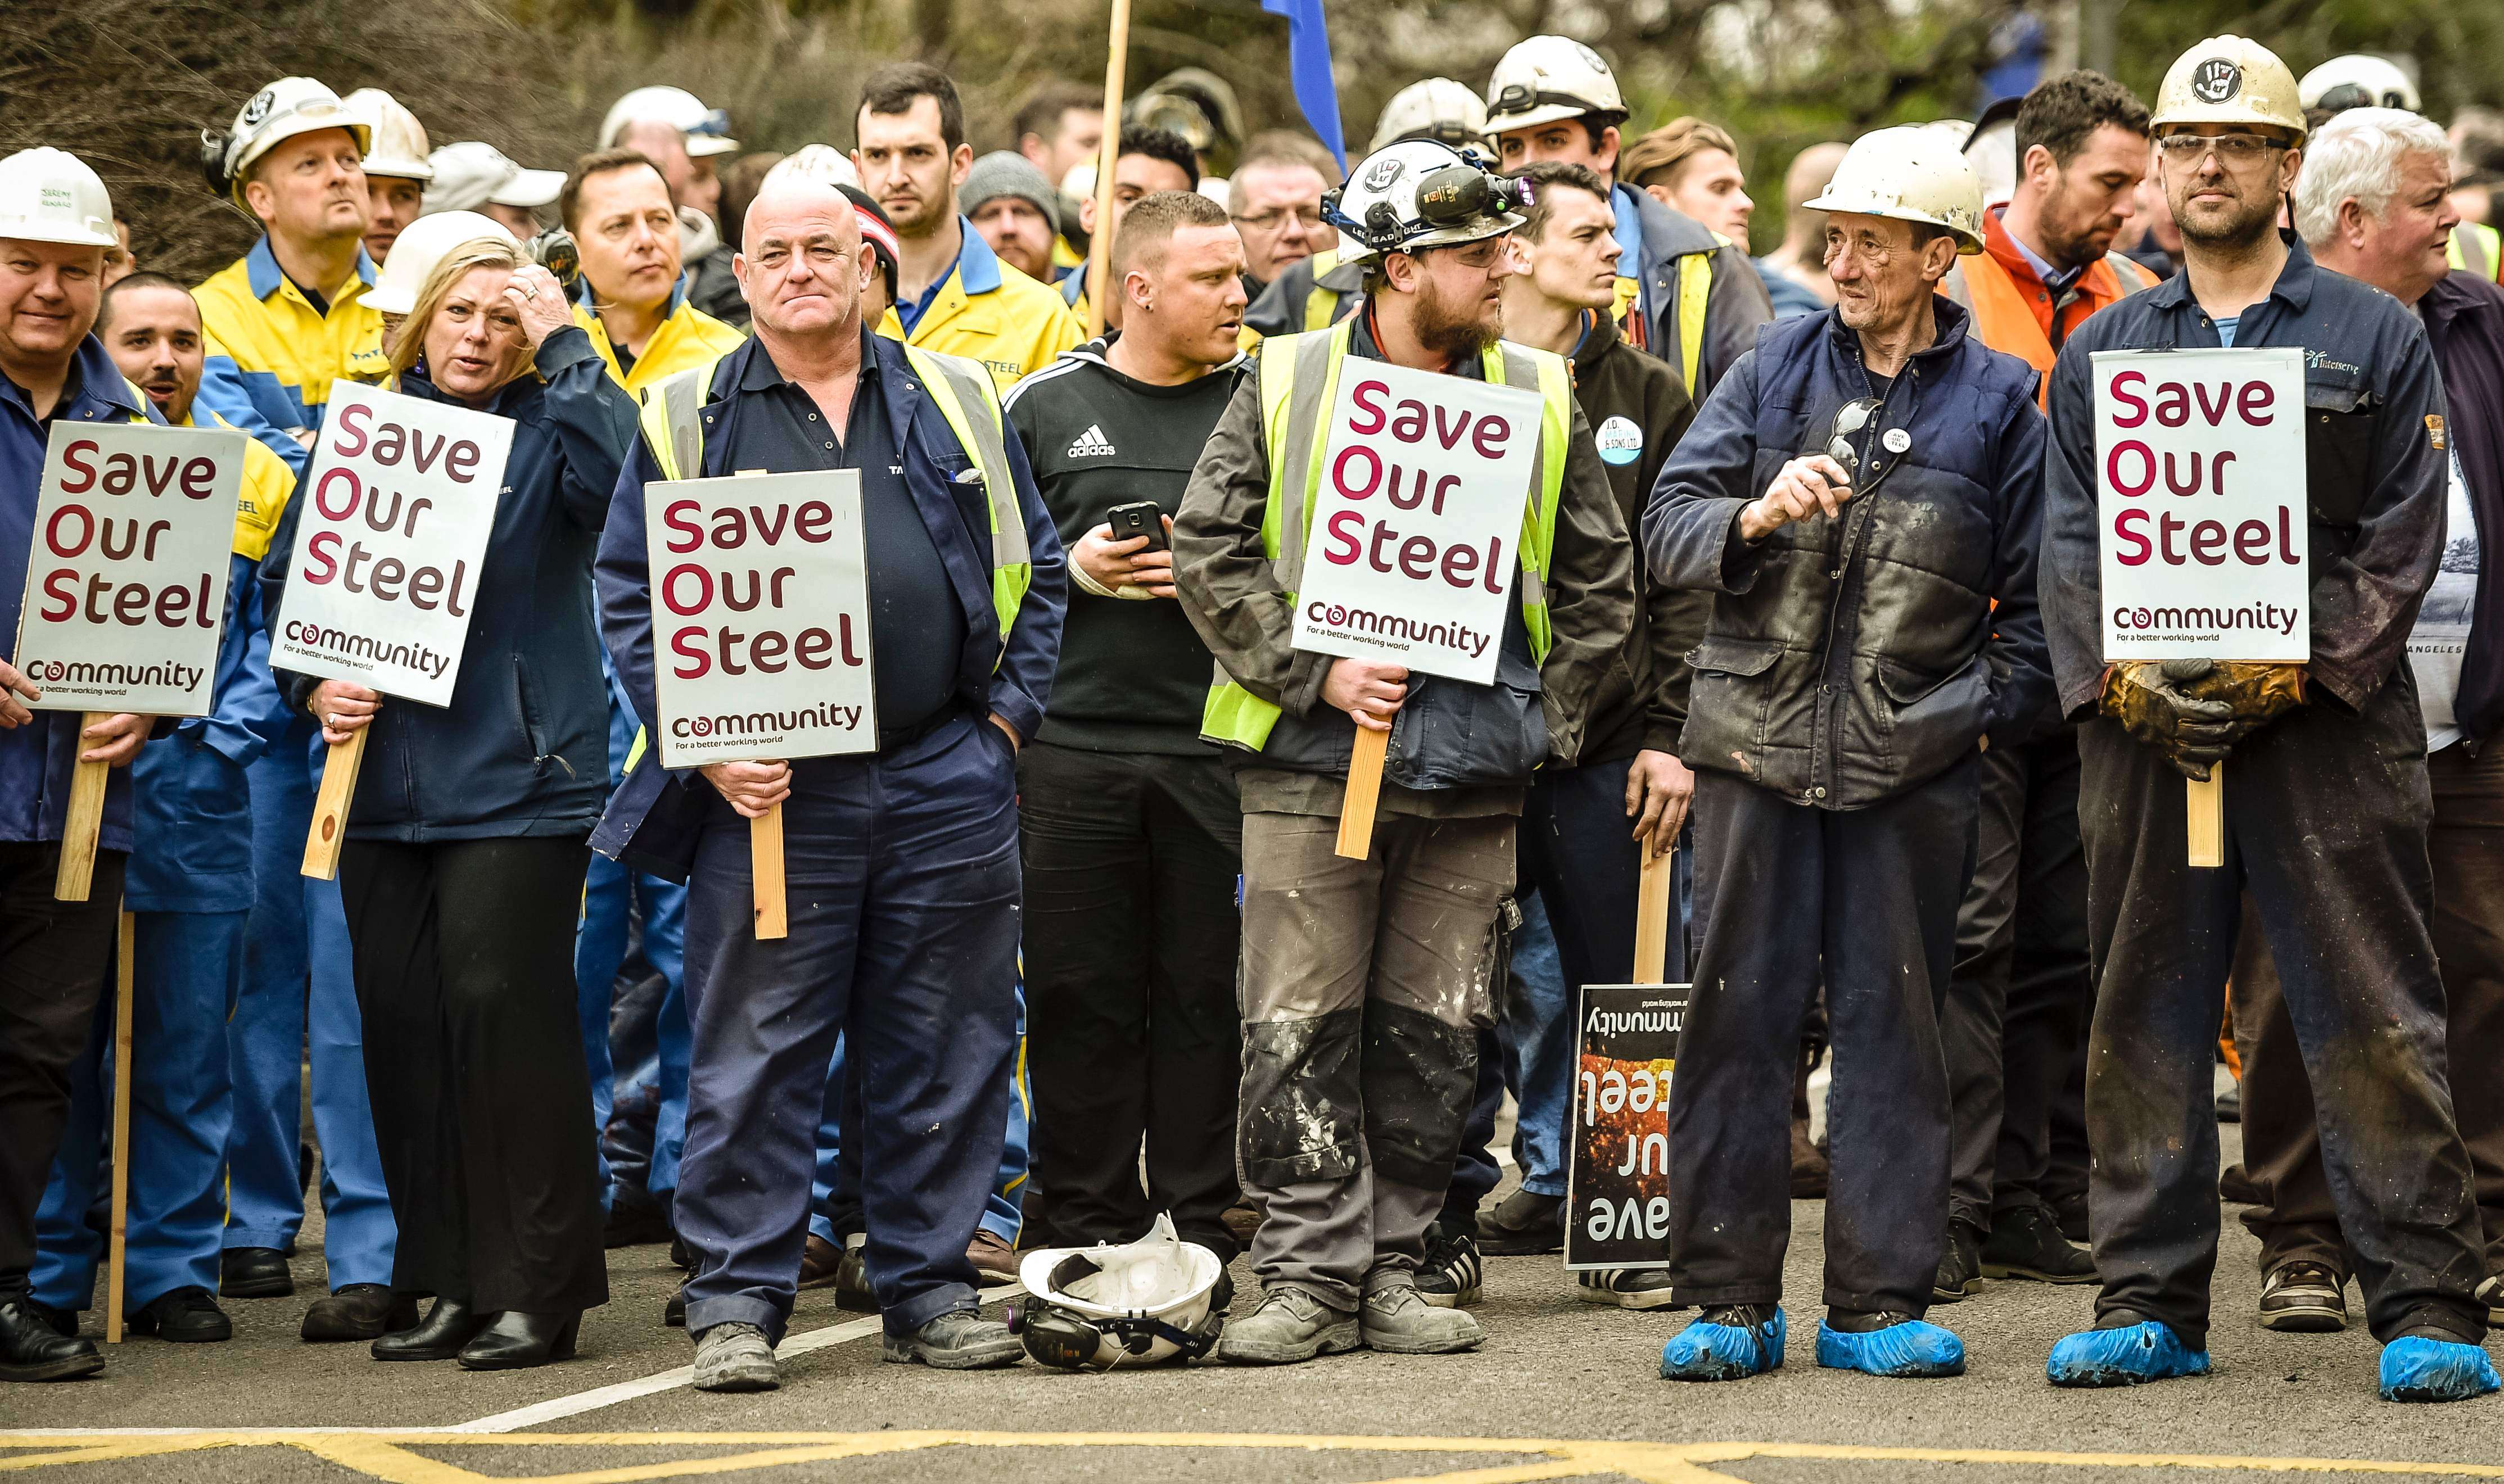 Workers at Tata Steel’s plant in Port Talbot, Wales, wait for news on a meeting to try and save their jobs. Tata is selling its loss-making steel operations in Britain. Rightly or wrongly, this has been blamed on cheap Chinese steel. Photo: AFP